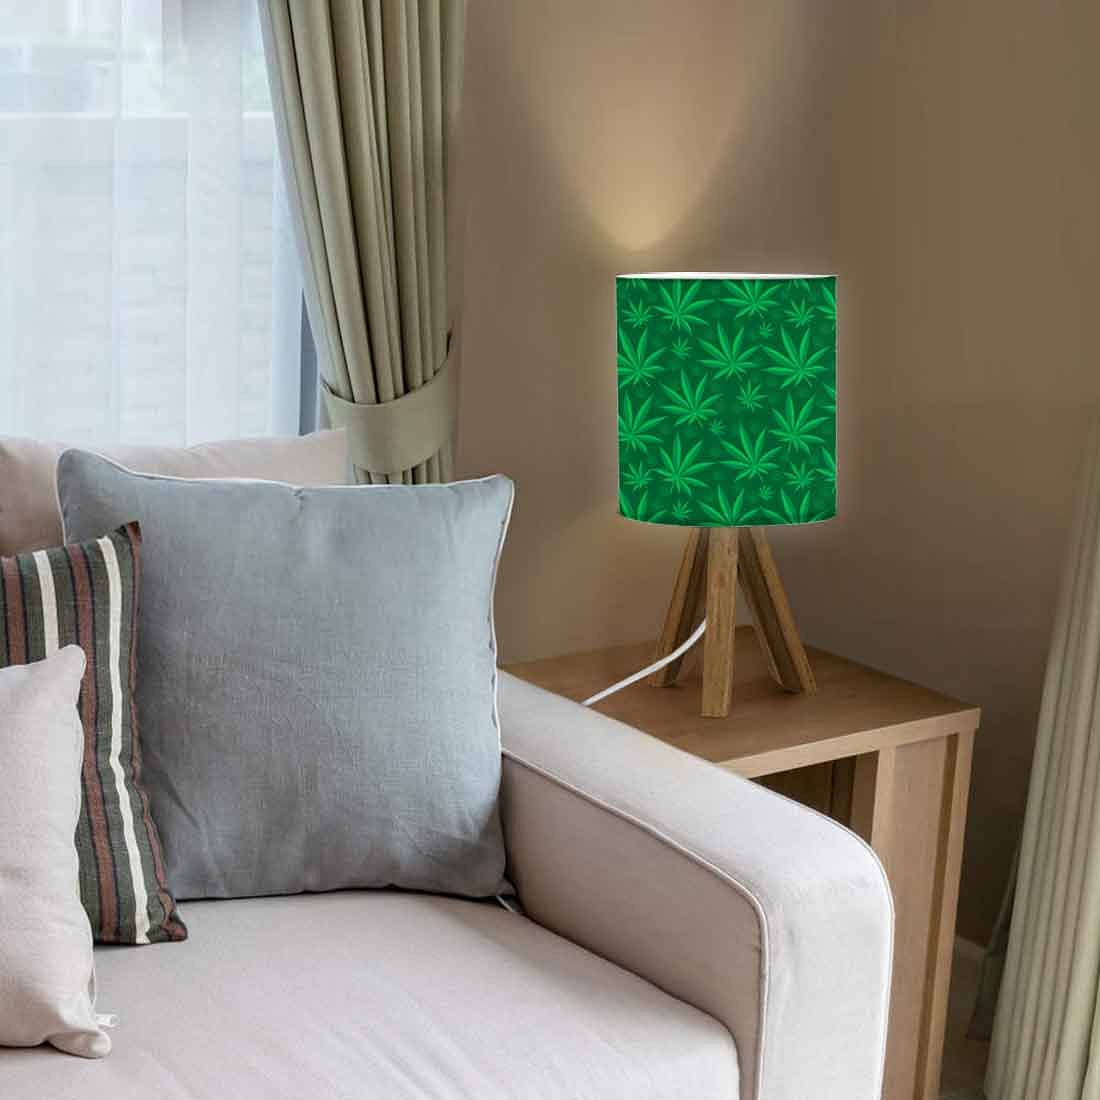 Small Wooden Table Lamp For Bedroom Living Room-Green Leaves Nutcase